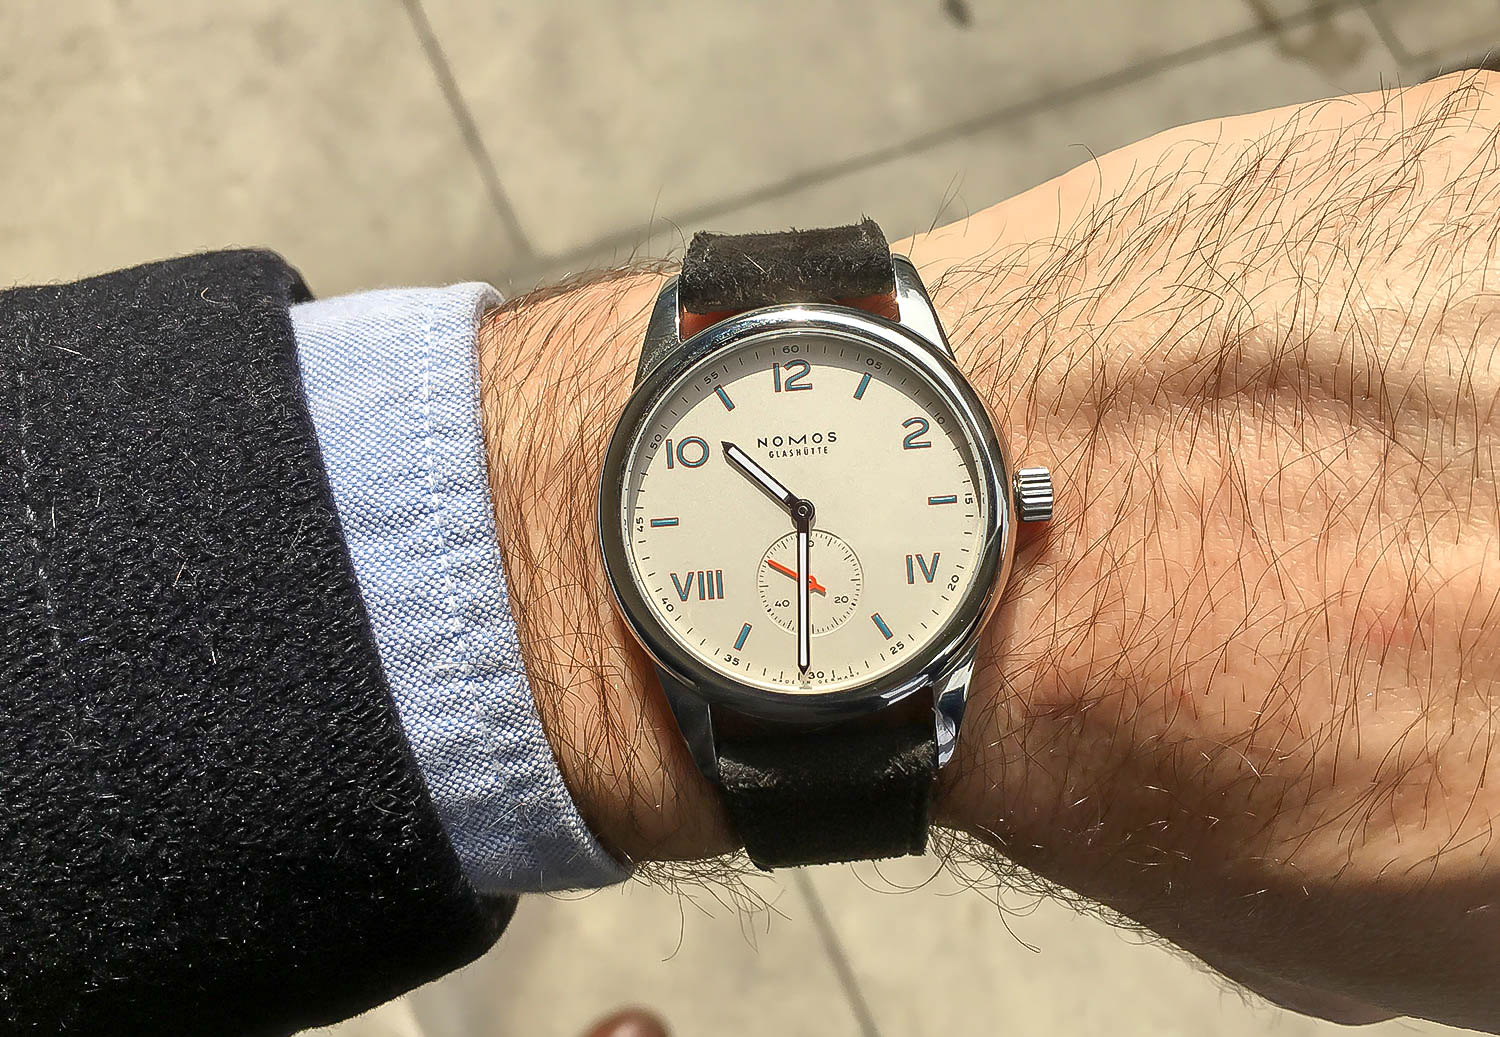 Owner Review: Nomos Club Campus Ace - FIFTH WRIST